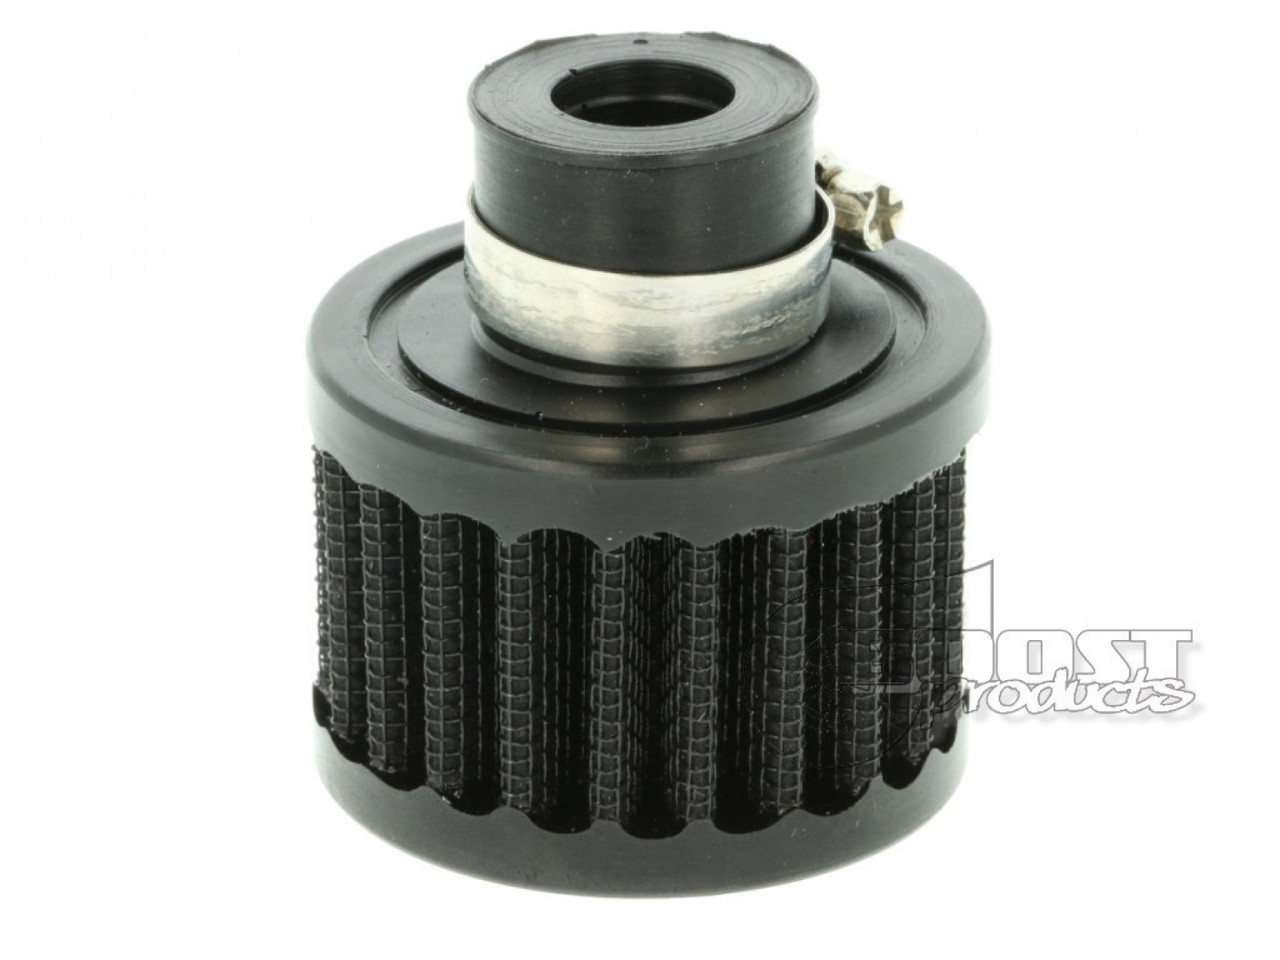 BOOST Products Crankcase Breather Filter with 19mm (3/4") ID Connection, Black (BOP-IN-LU-050-019)